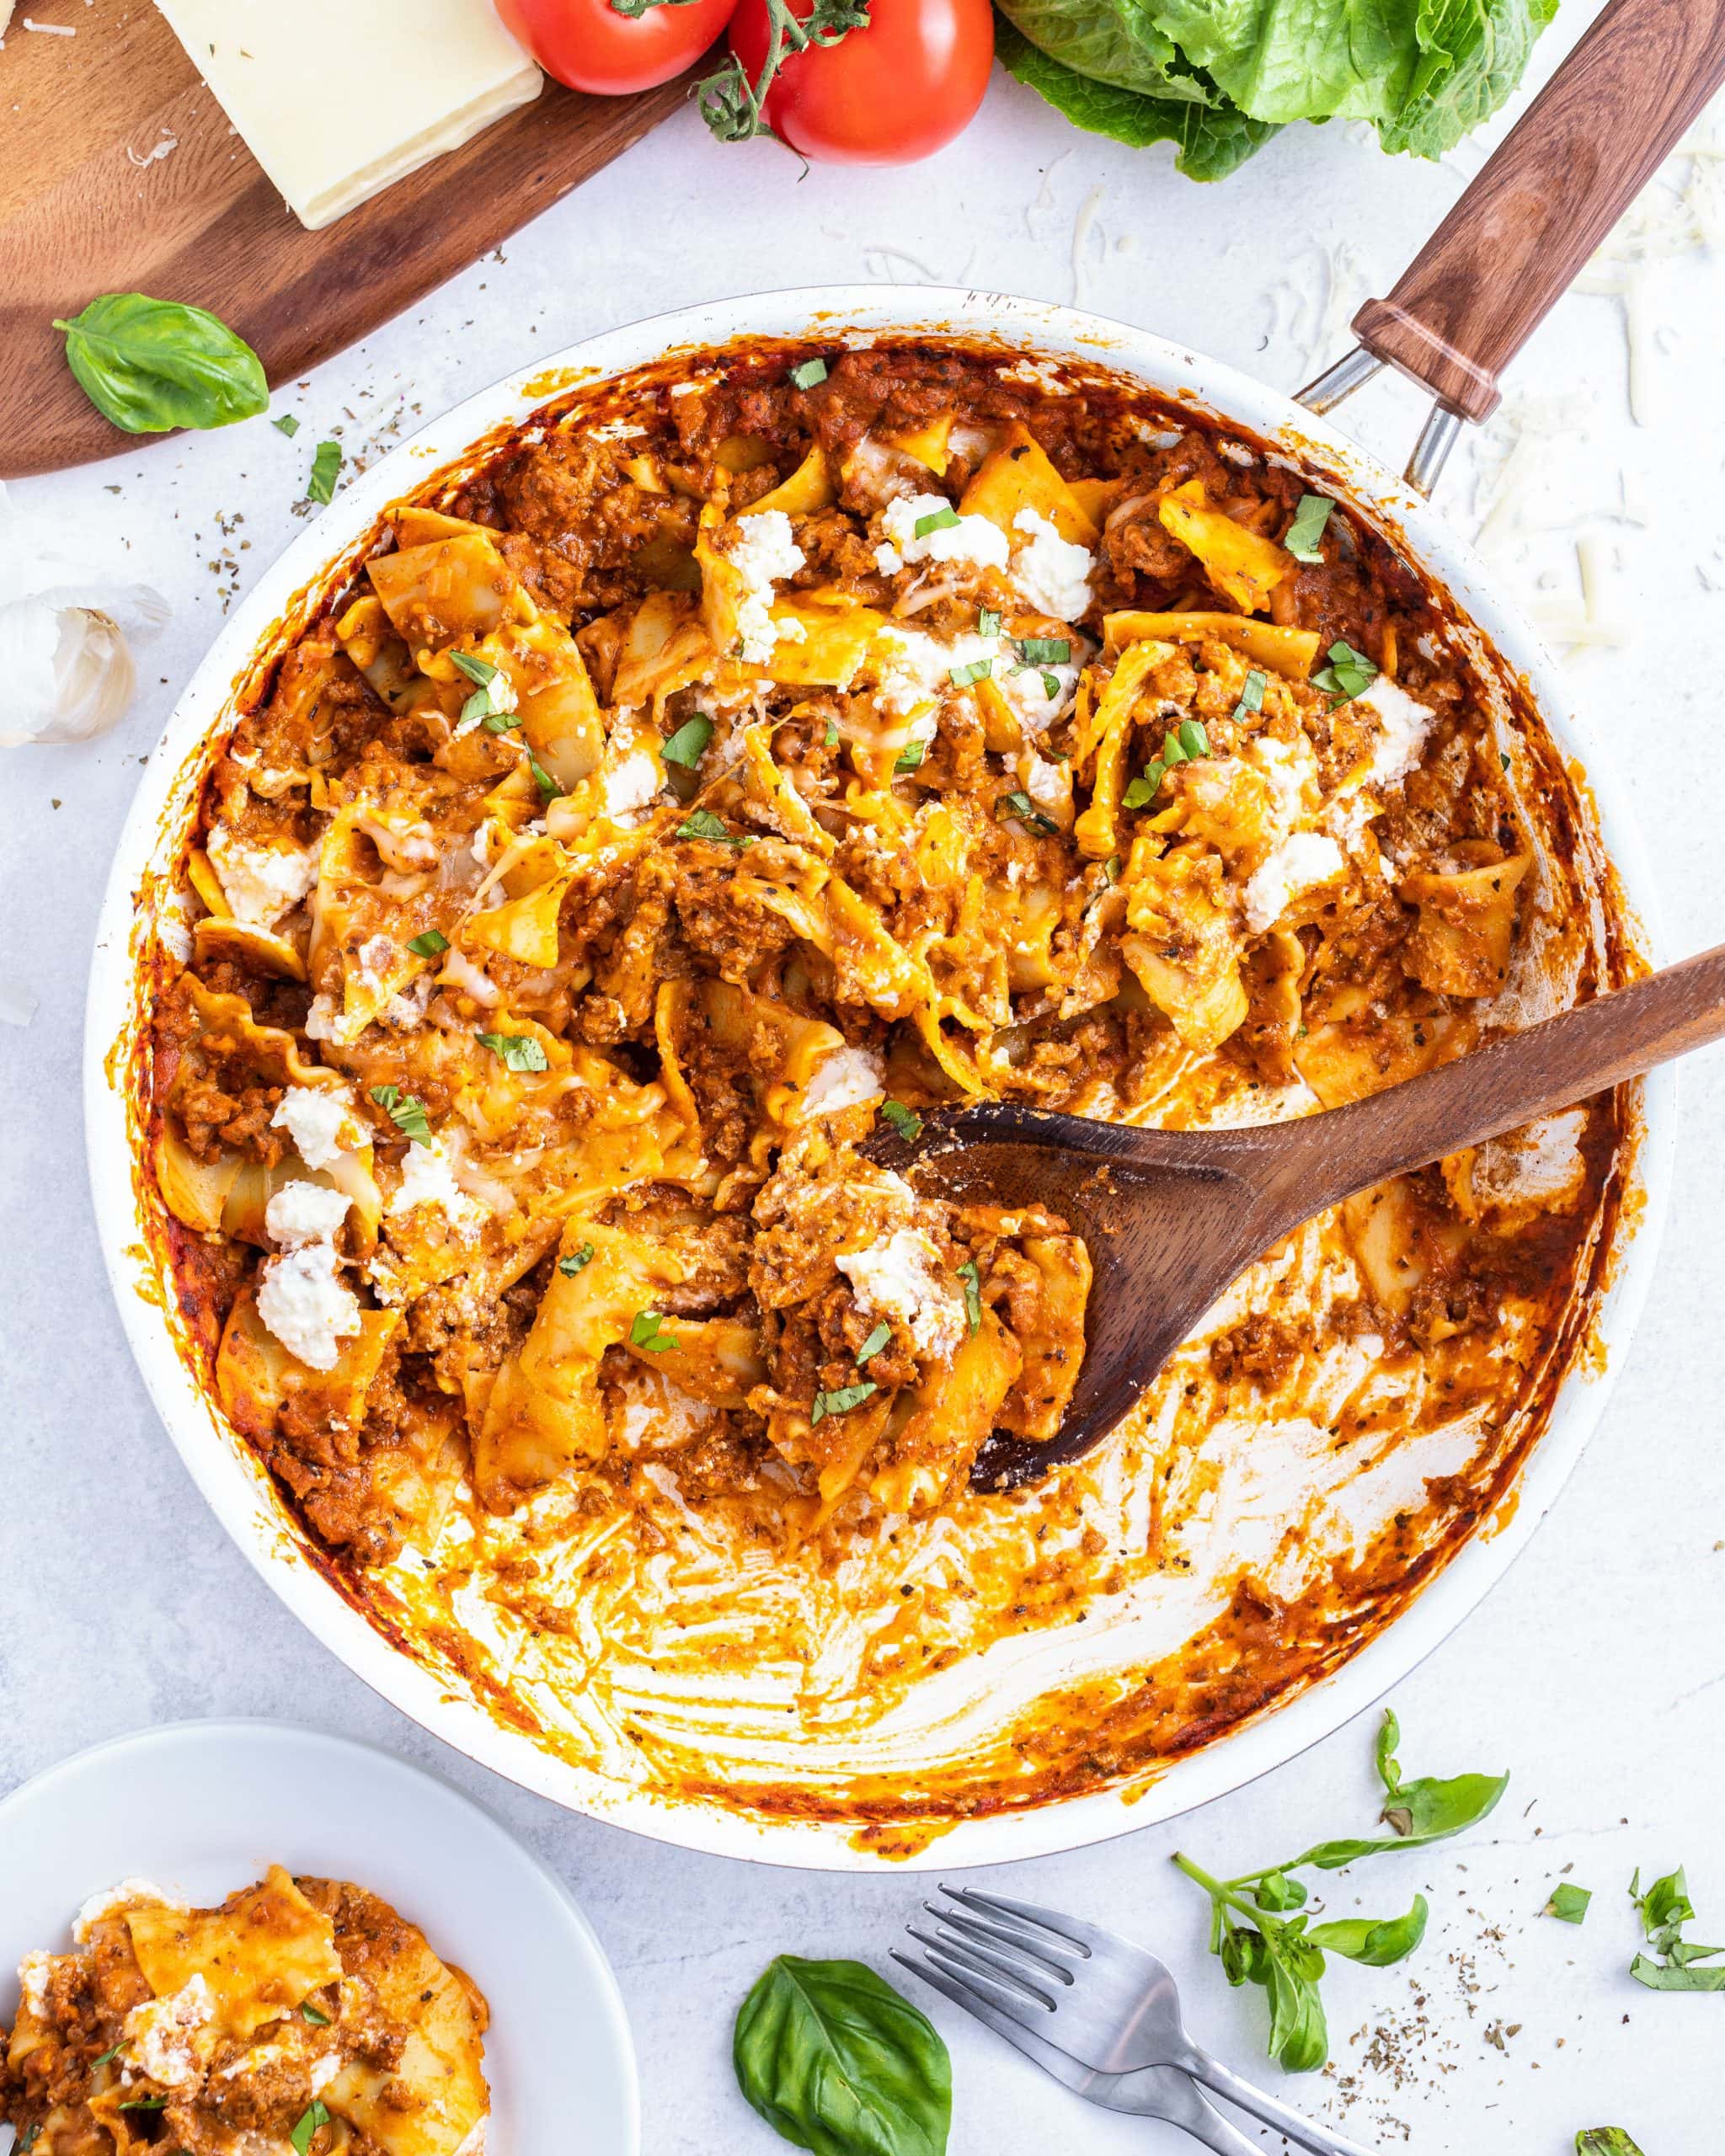 A pan full of skillet lasagna topped with ricotta dollops.